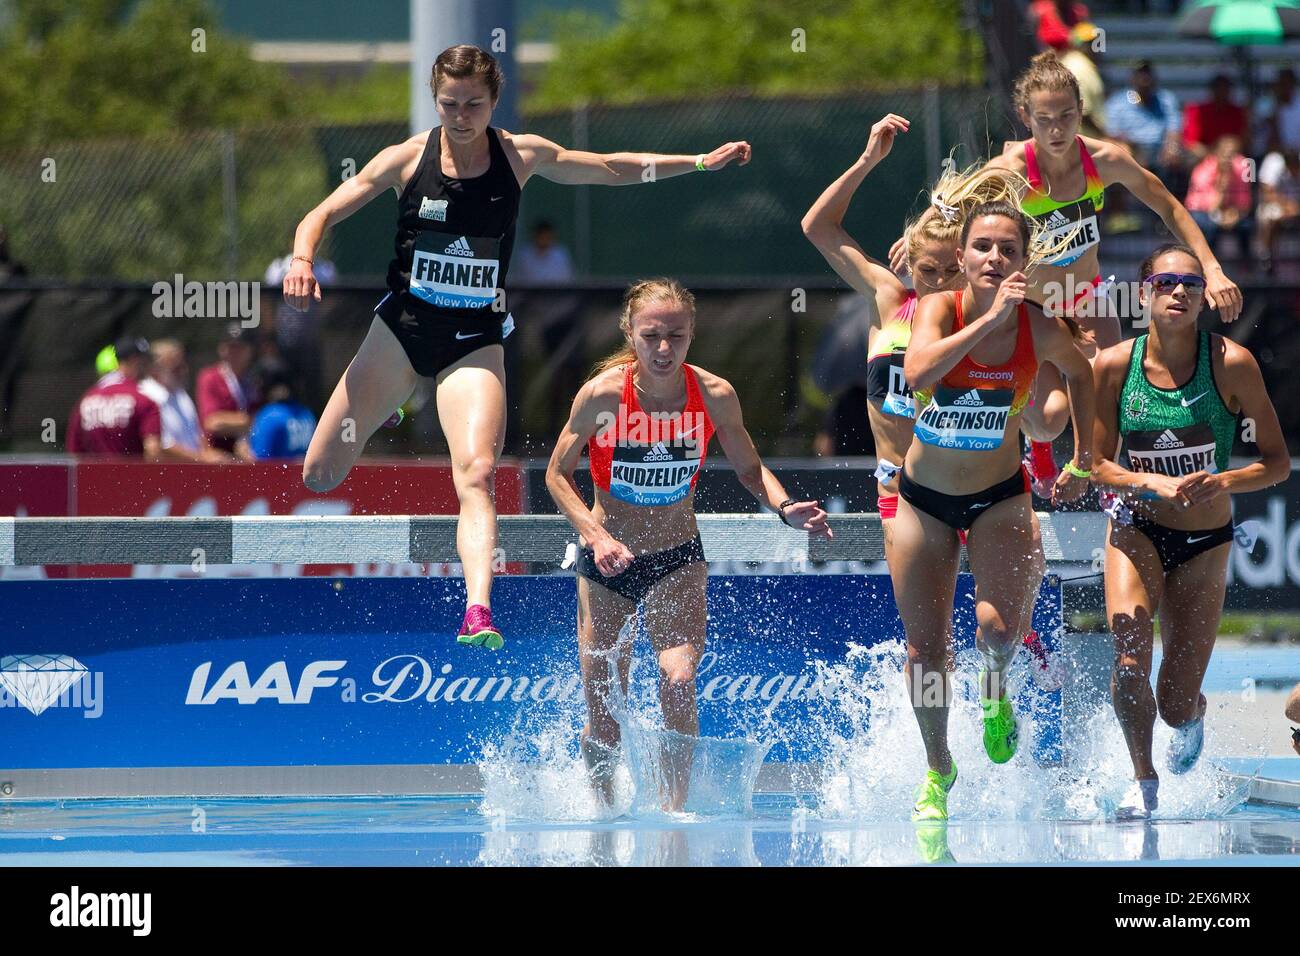 June 13, 2015; Randall's Island, NY, USA; Aisha Praught and Ashley  Higginson of the United States compete in the women's 300m steeplechase  during the IAAF Diamond League Adidas Grand Prix at Icahn